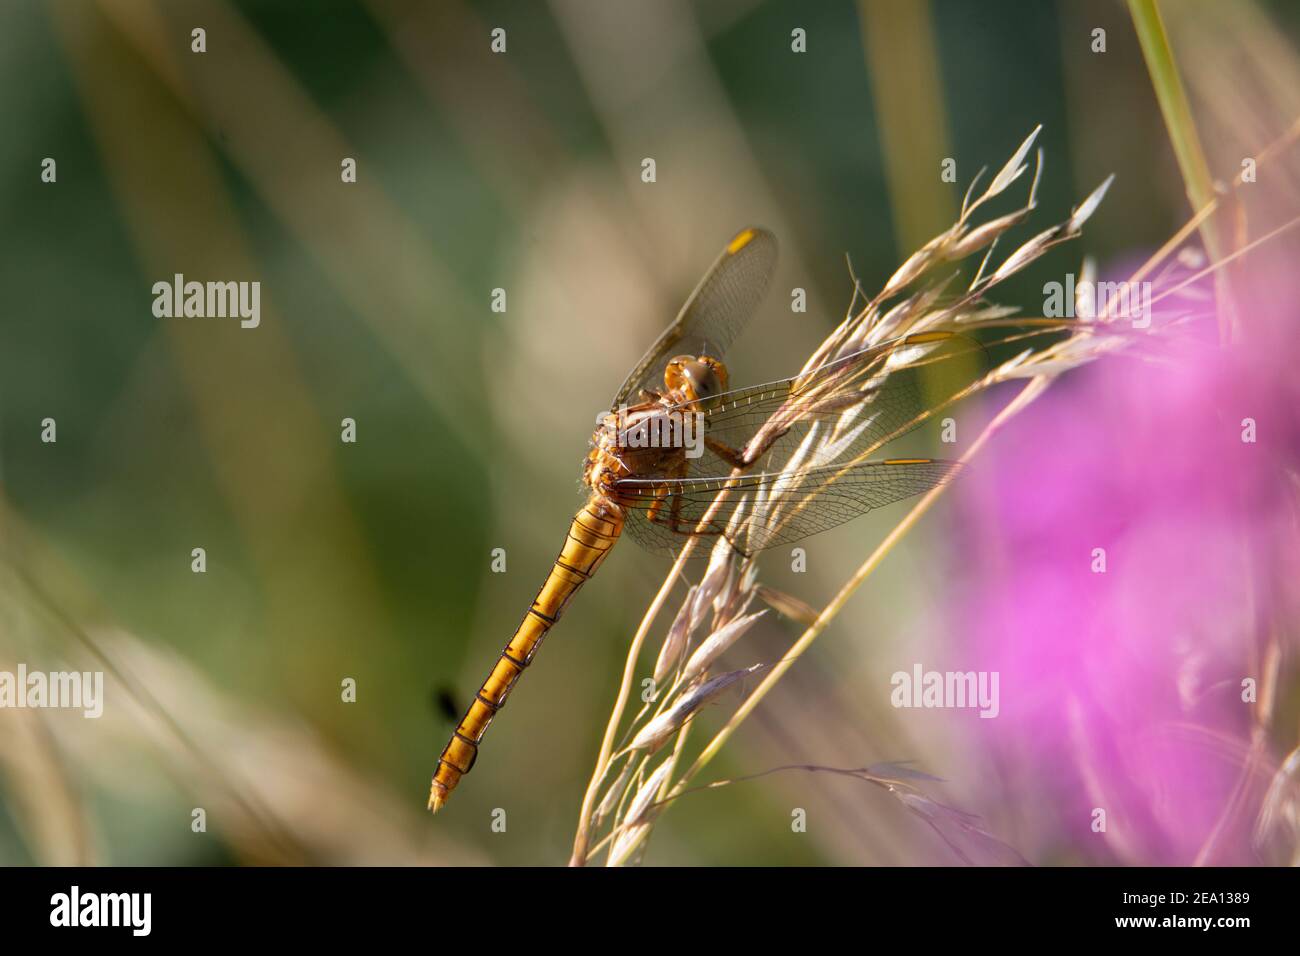 brown dragonfly resting on a dried grass seed head Stock Photo